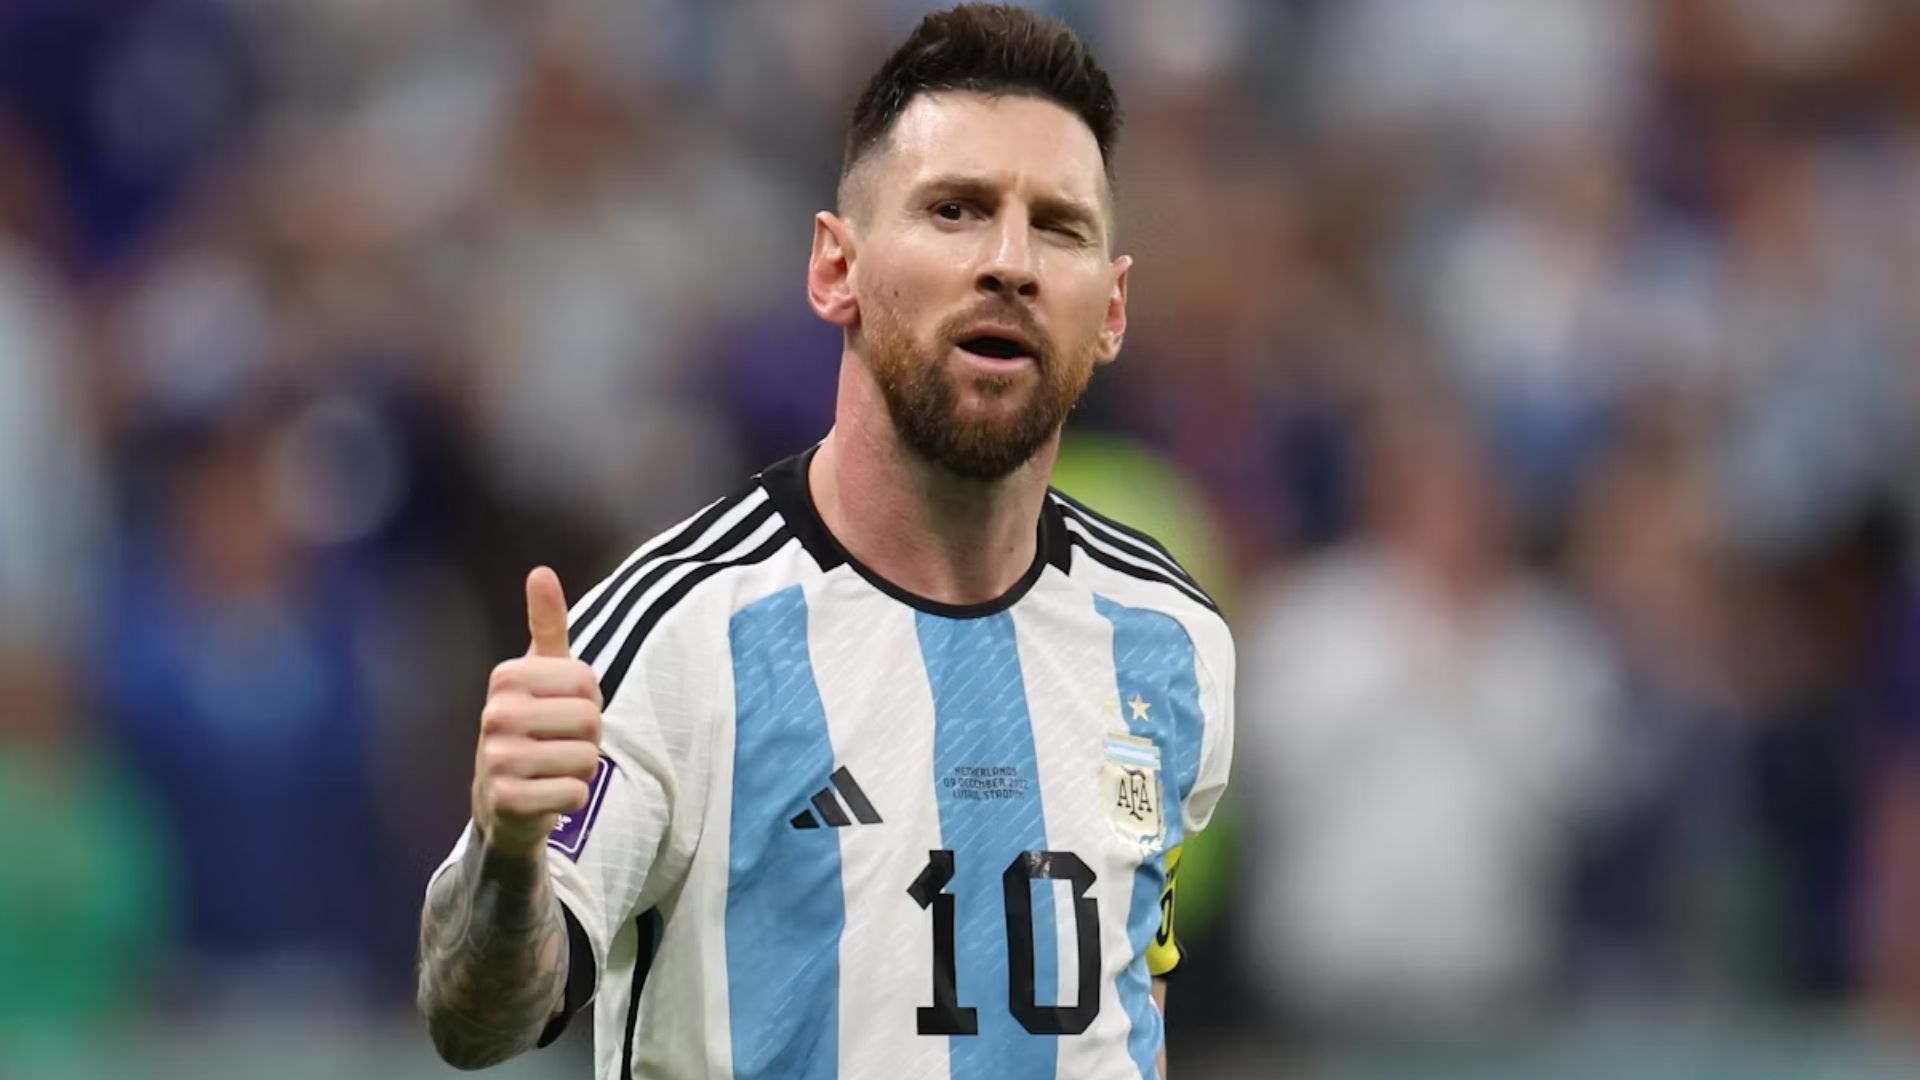 Woman Gets Revenge On Cheating Boyfriend, Gives Away His Autographed Messi Jersey